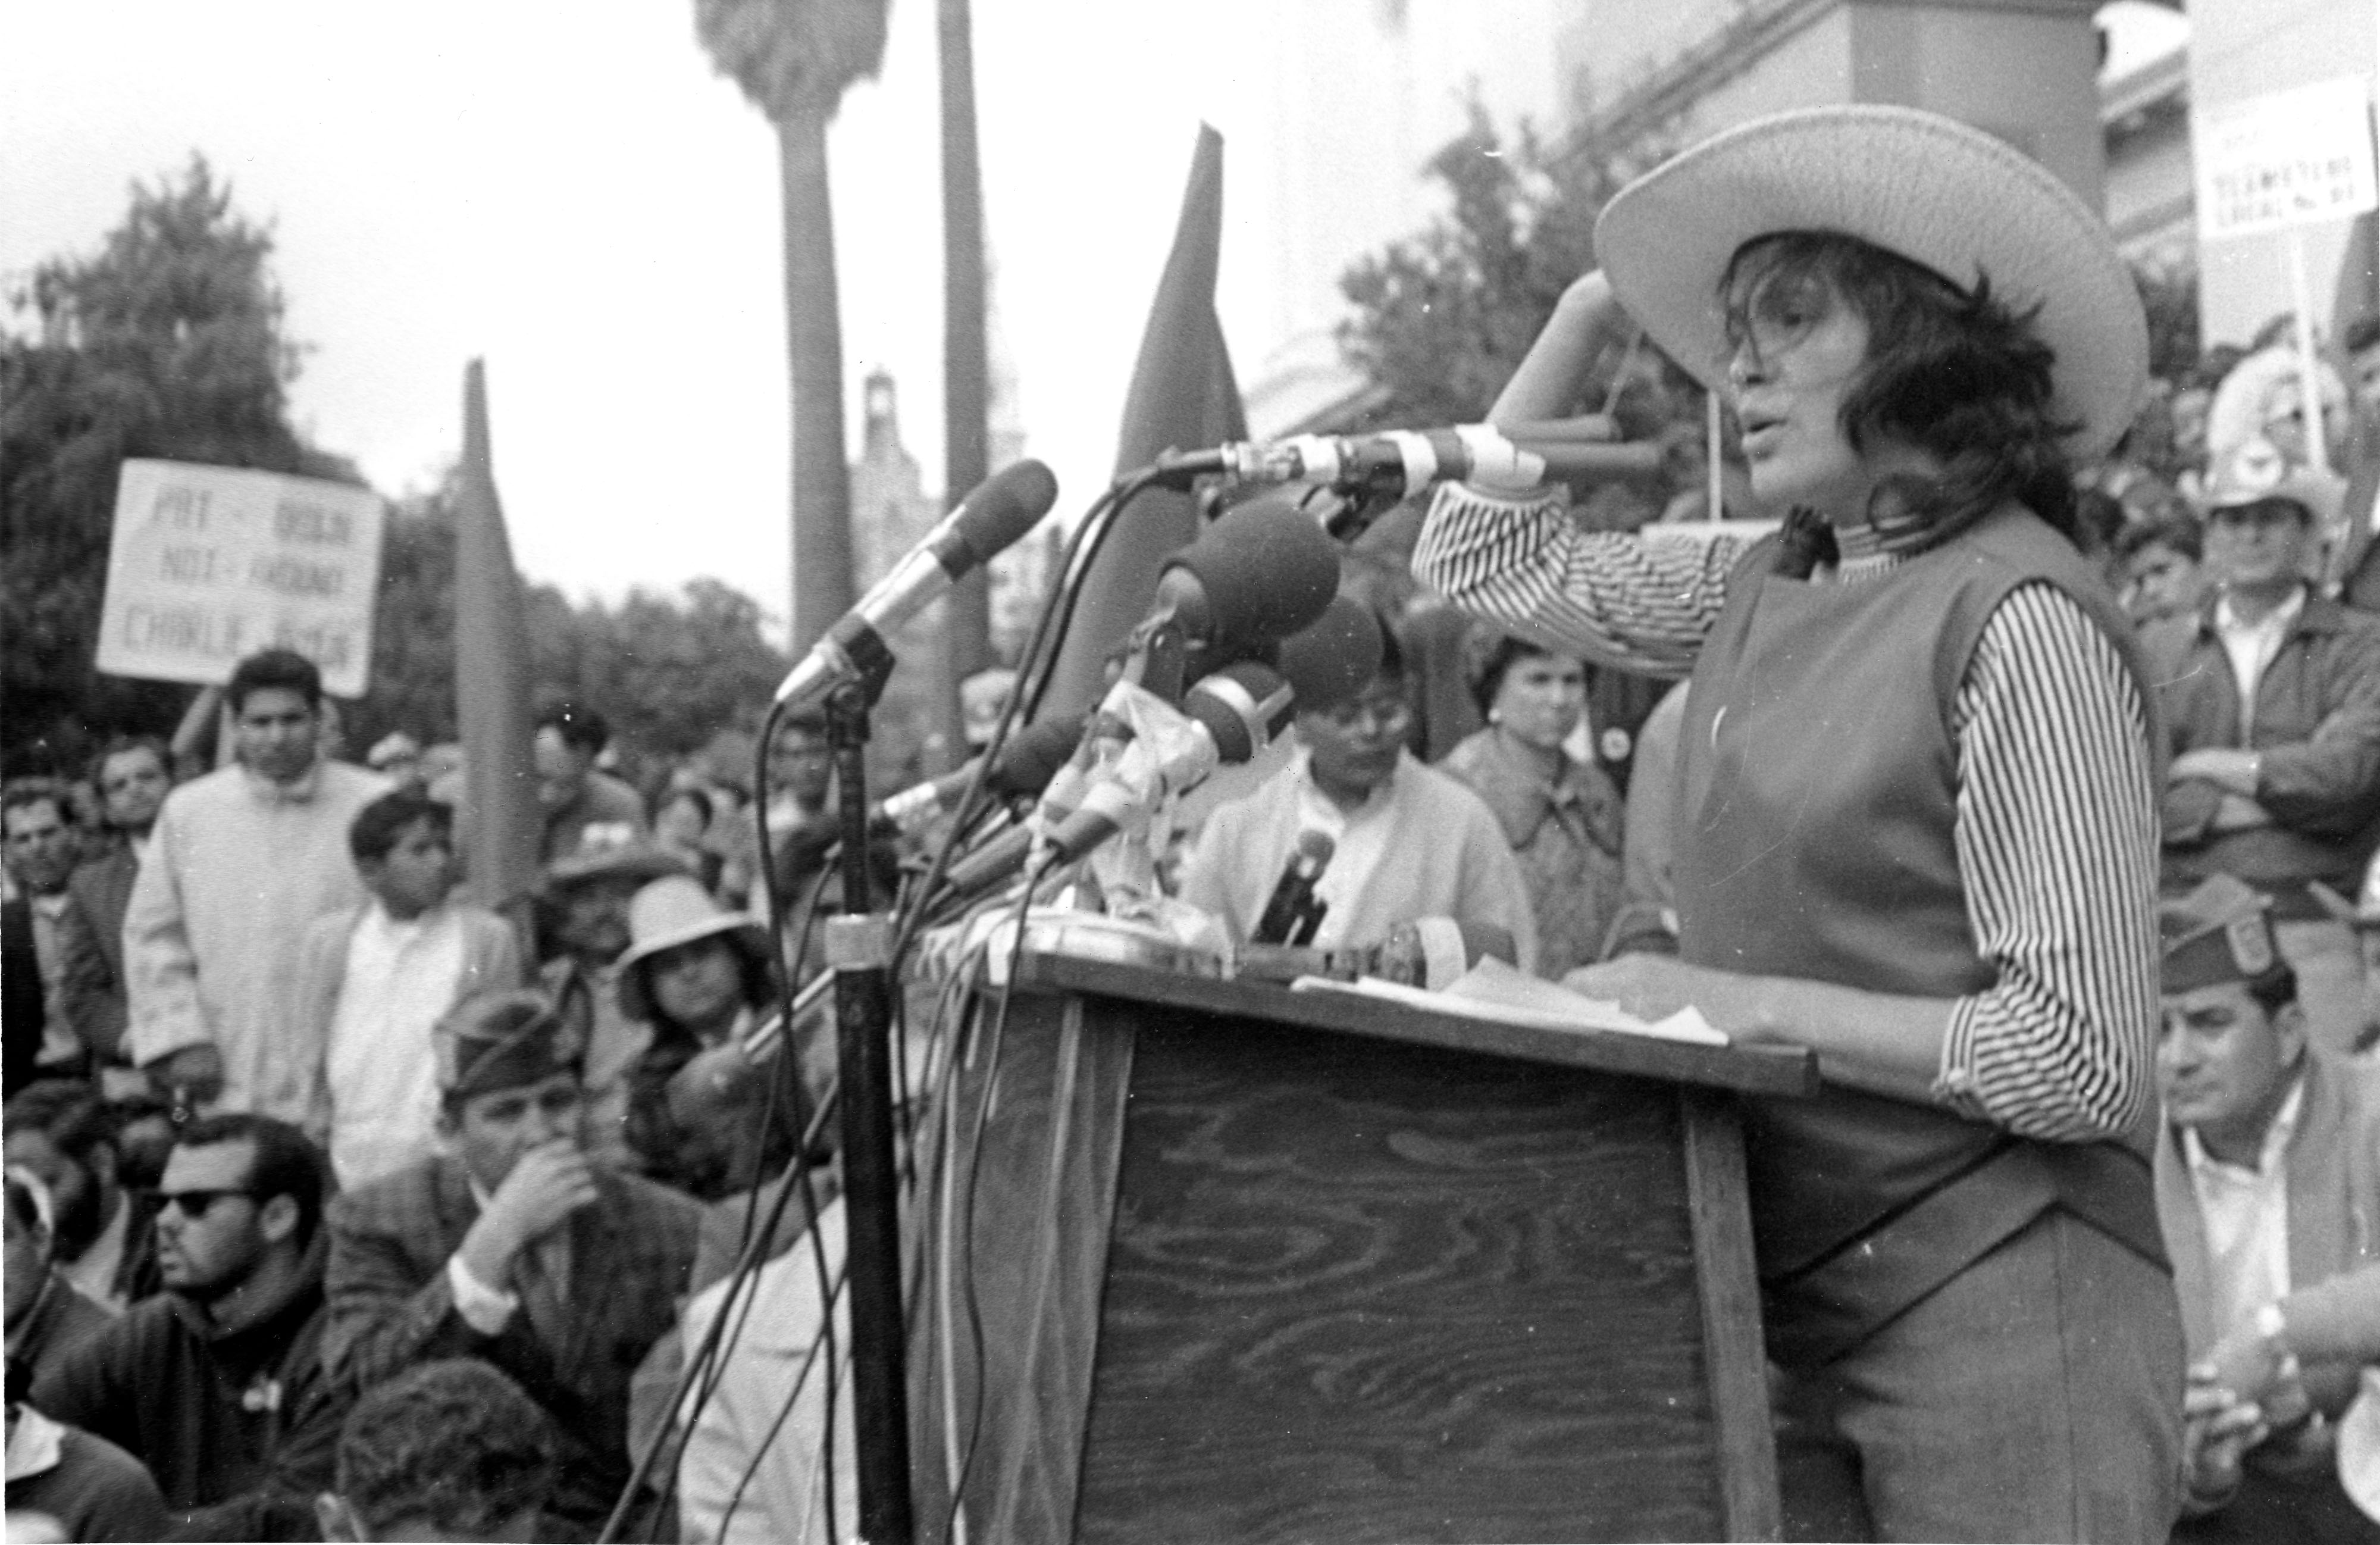 Dolores Huerta addressing an ecstatic audience